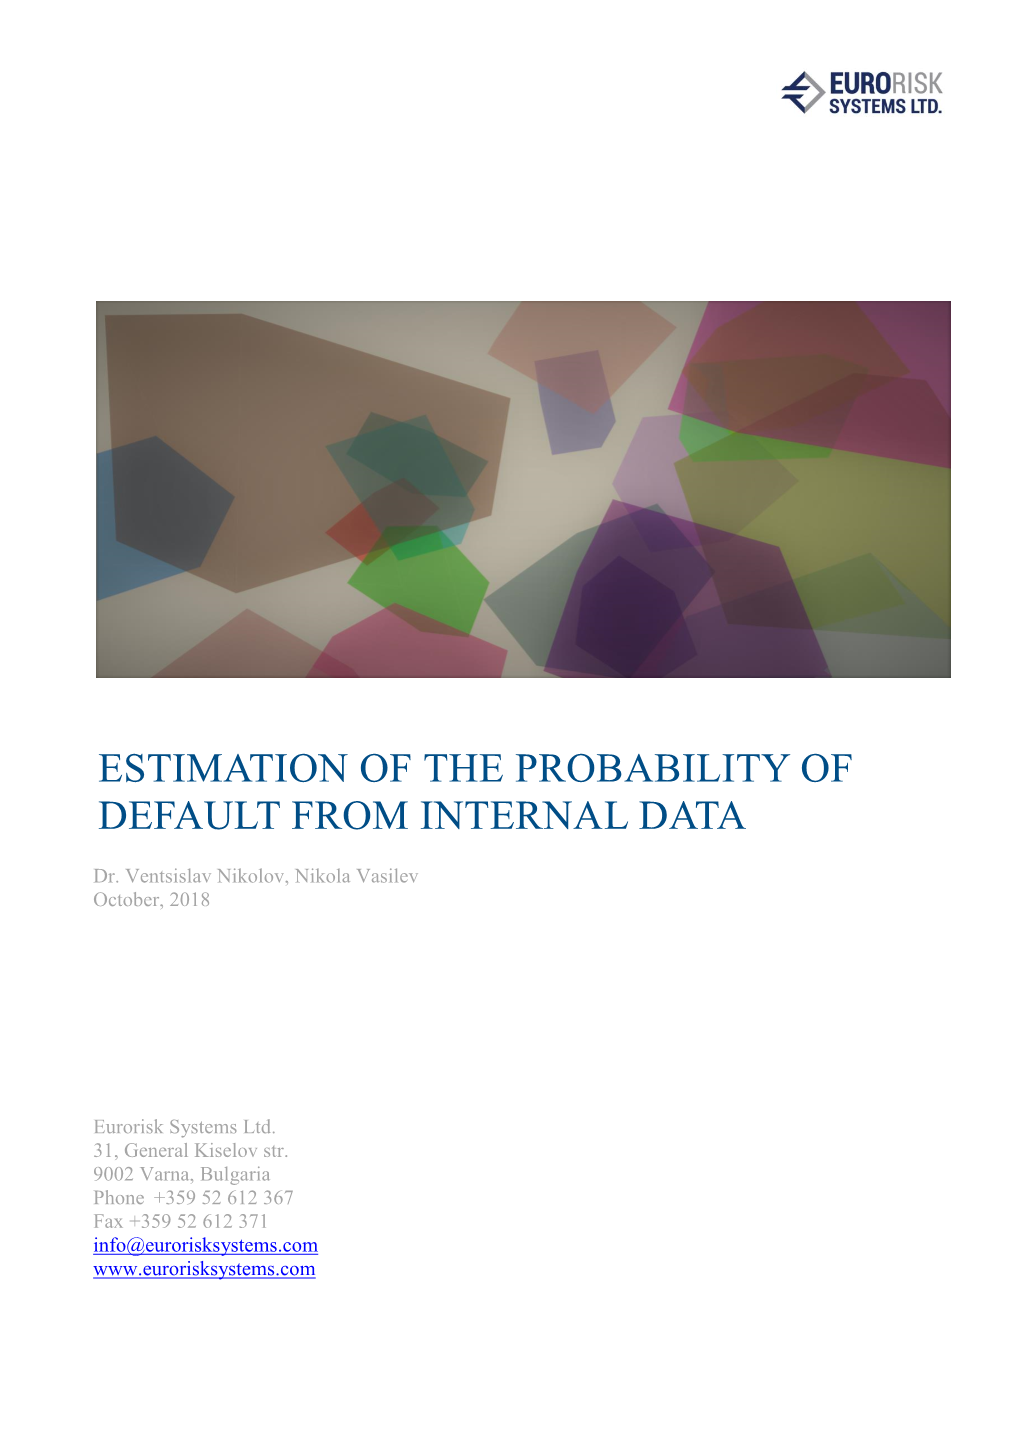 Estimation of the Probability of Default from Internal Data, 2018 Dr